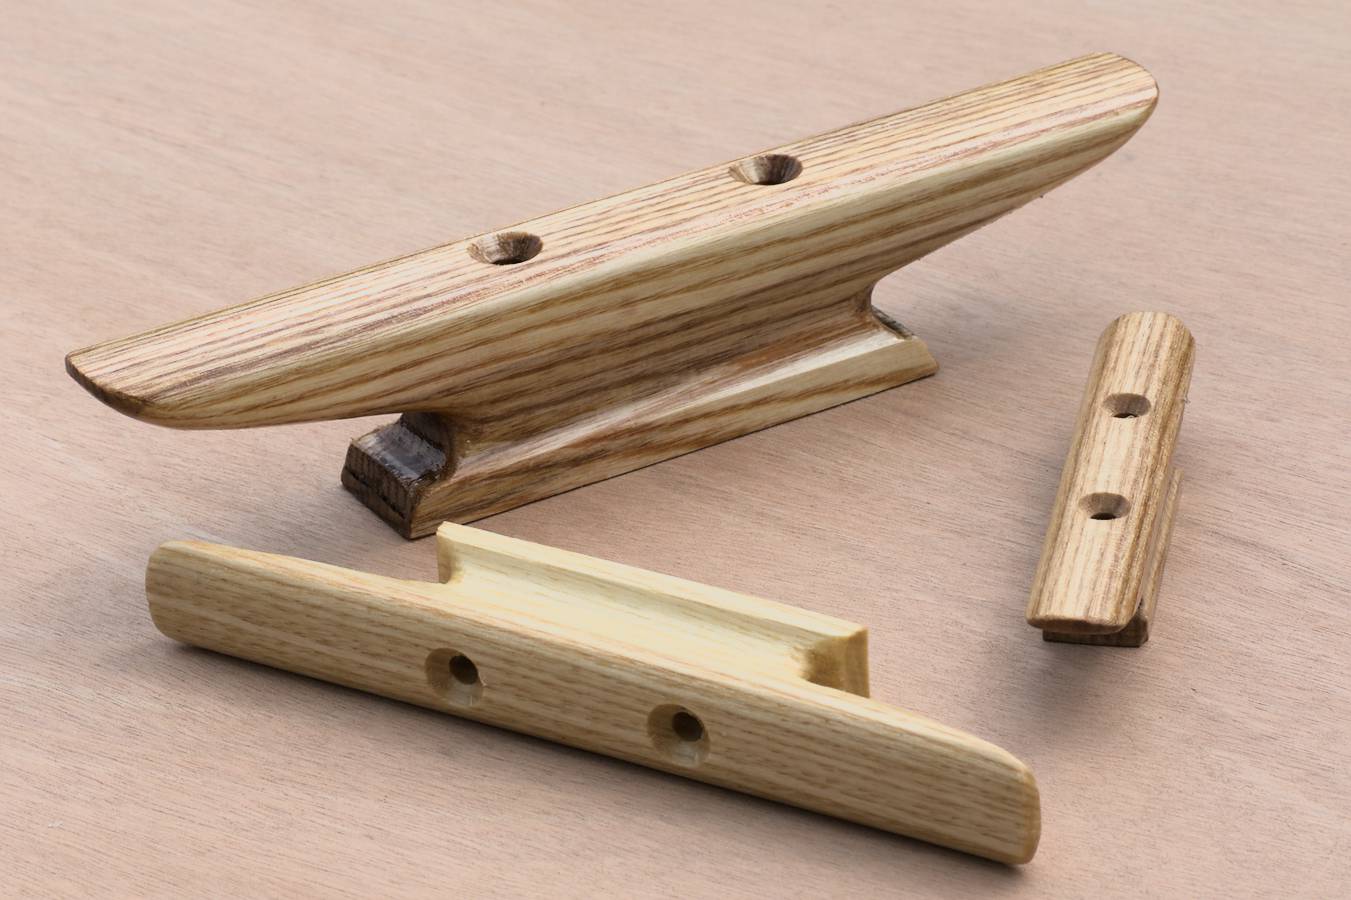 Handmade wooden horn cleats to add a traditional finishing touch to any wooden boat